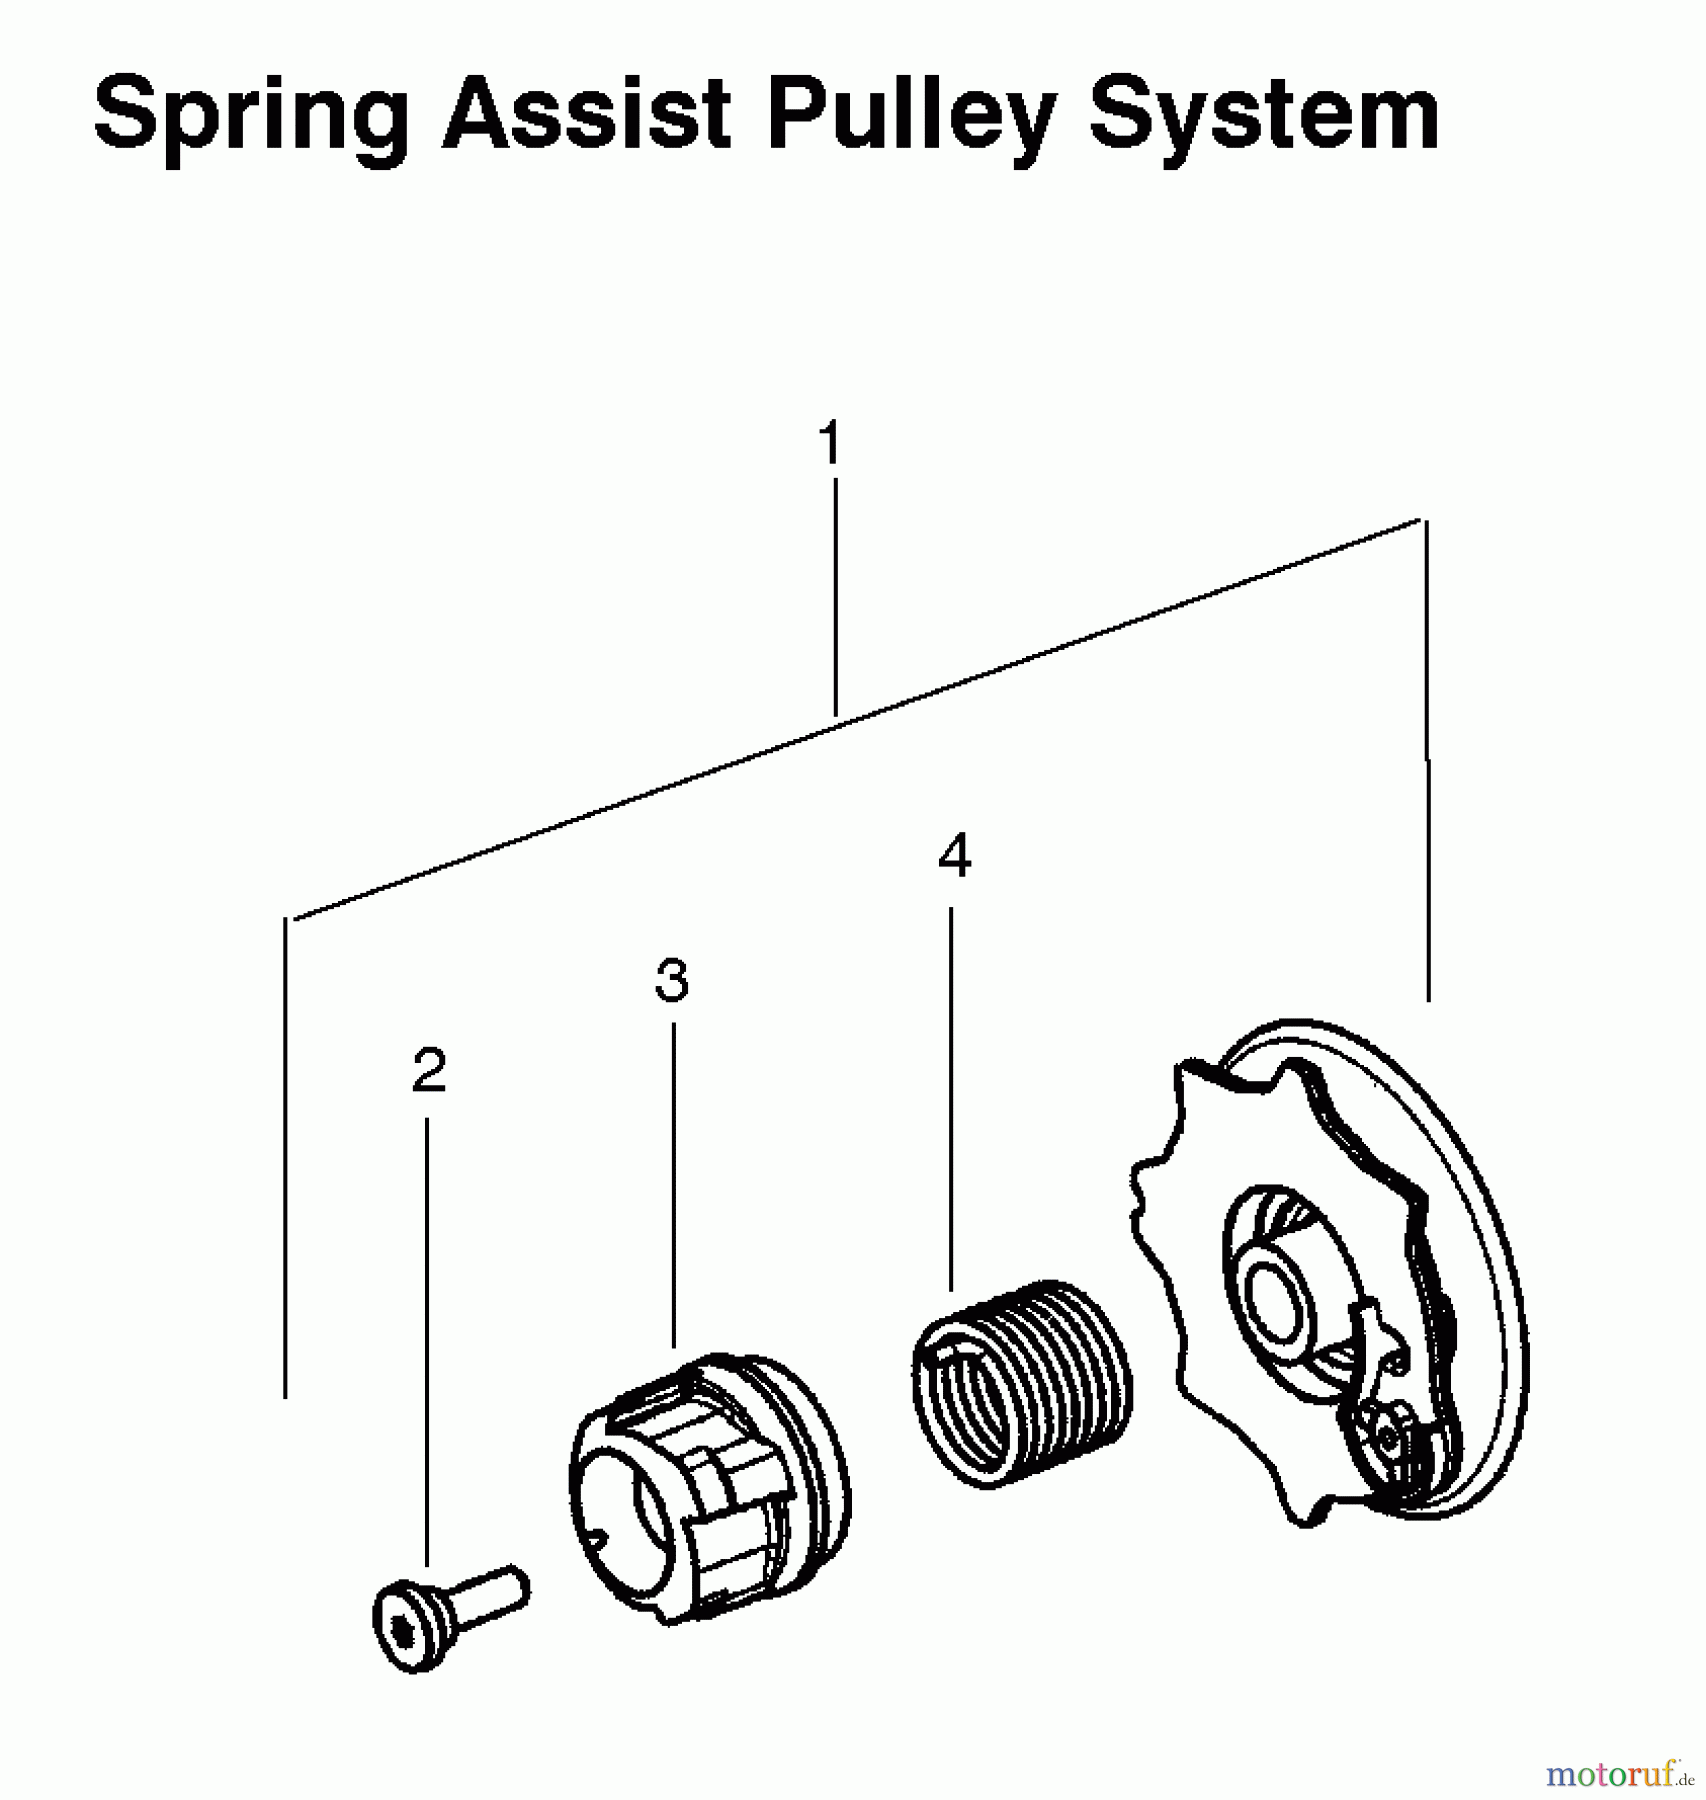  Poulan / Weed Eater Motorsägen P3314WS (Type 2) - Poulan Chainsaw Spring Assist Pulley System